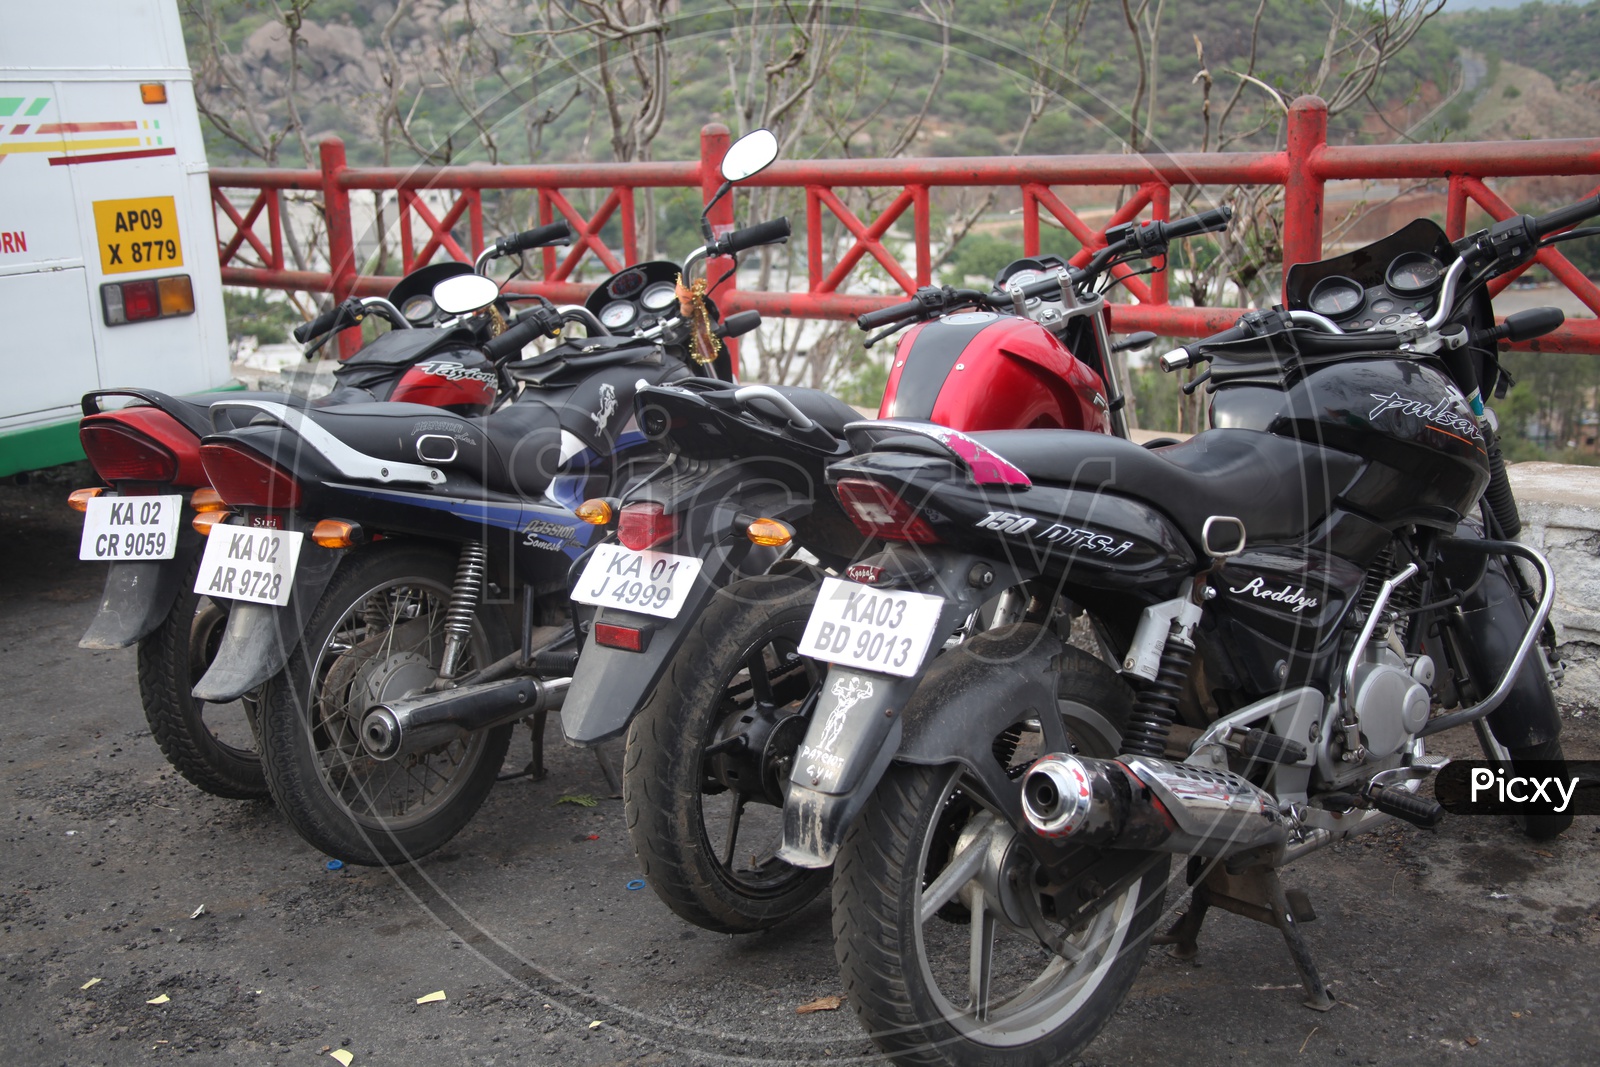 Bikes Parked In a Parking Place